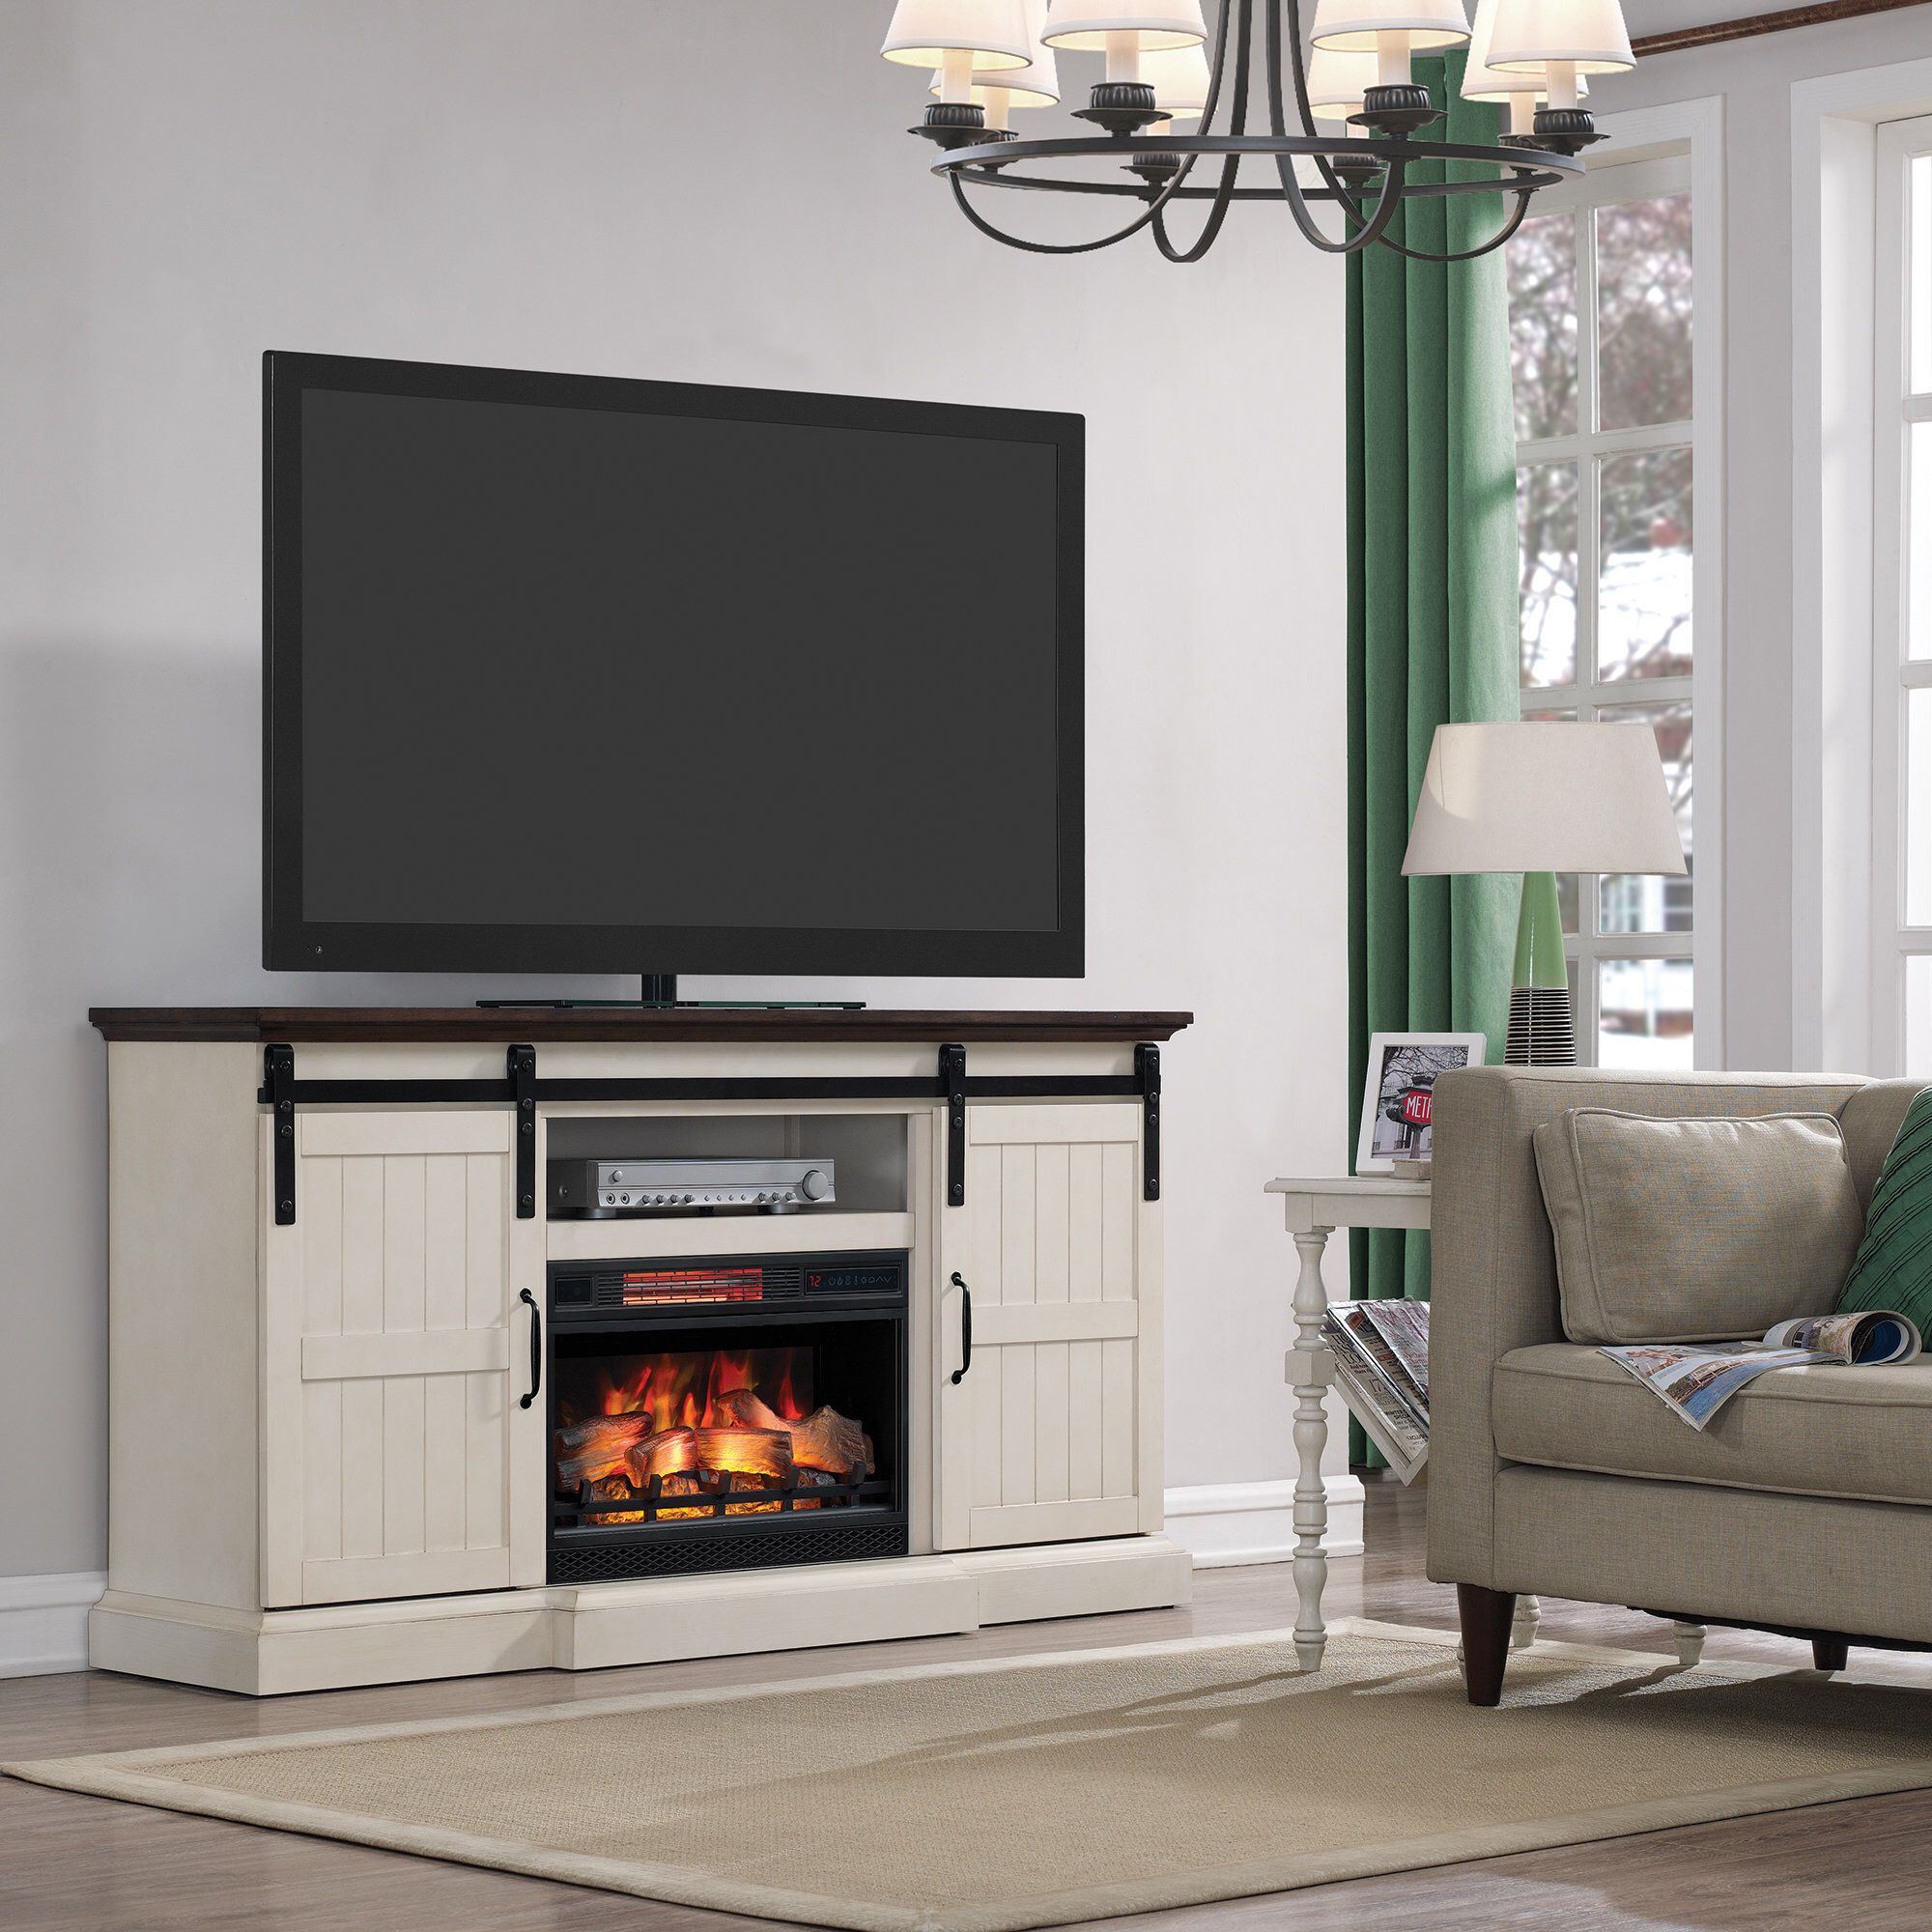 Sliding Barn Door Tv Stand with Fireplace New Glendora 66 5&quot; Tv Stand with Electric Fireplace